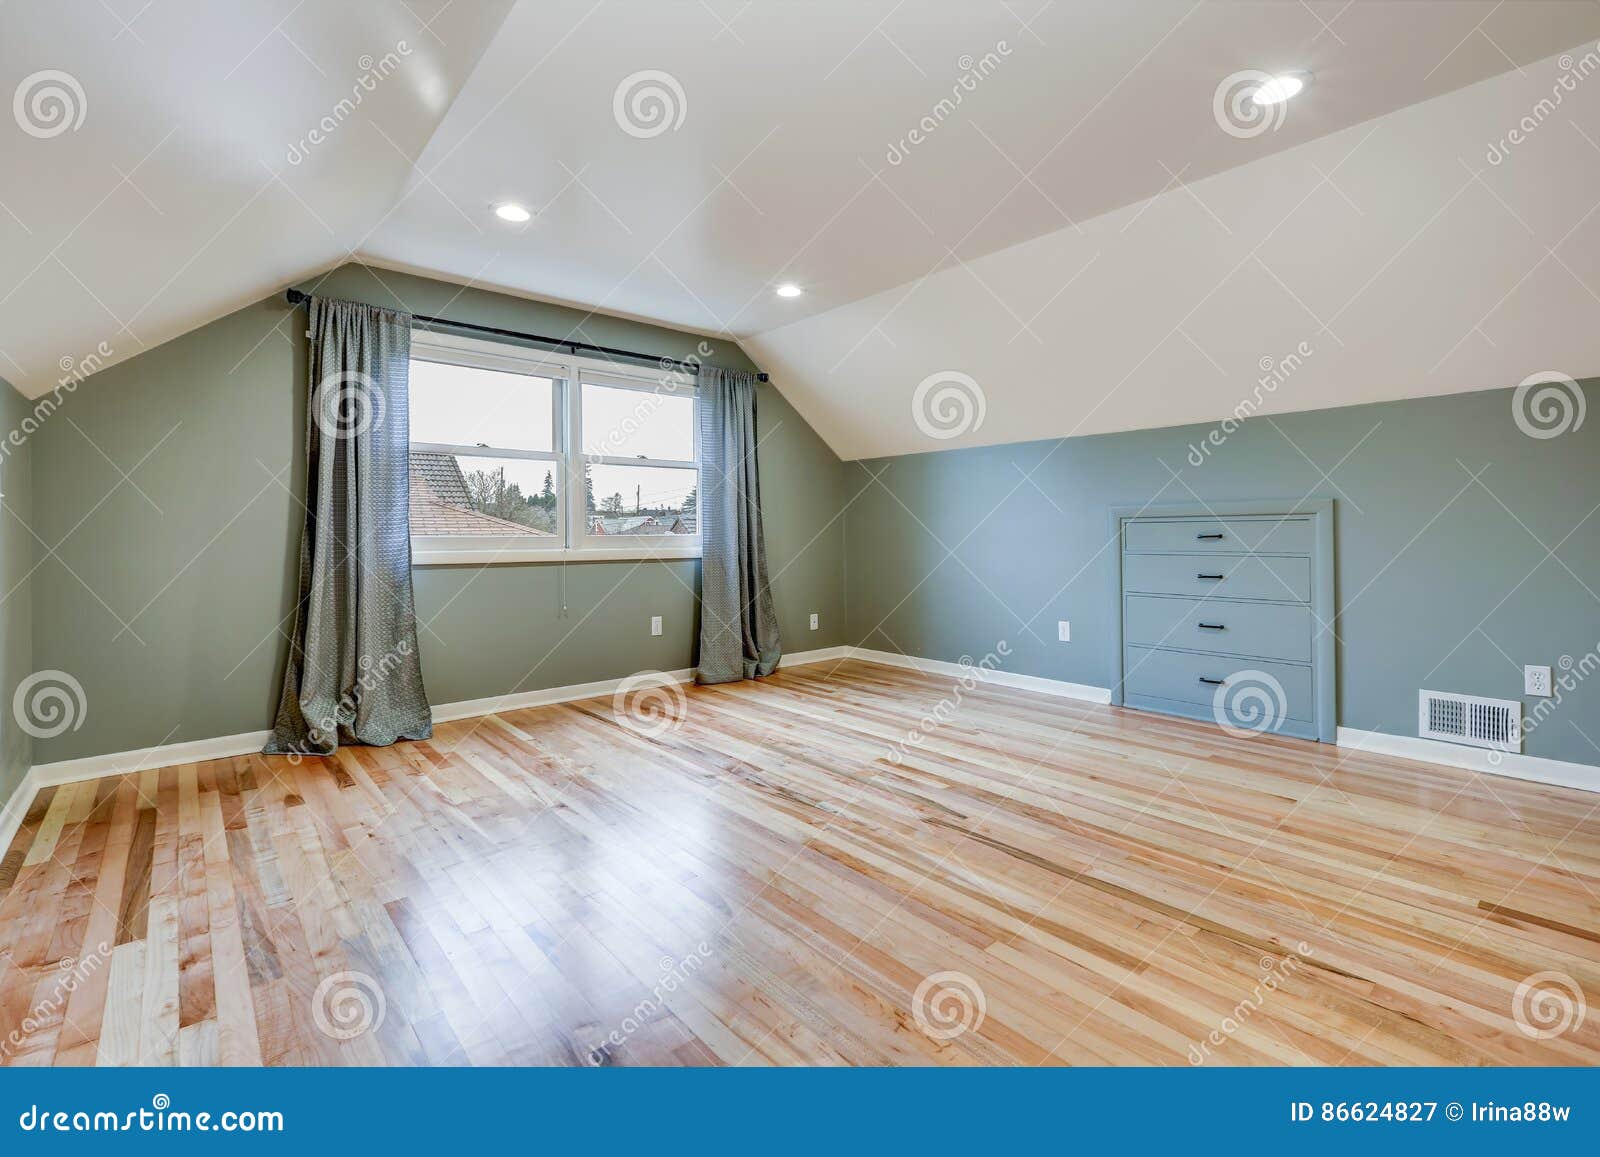 Green Empty Room With Vaulted Ceiling Stock Image Image Of